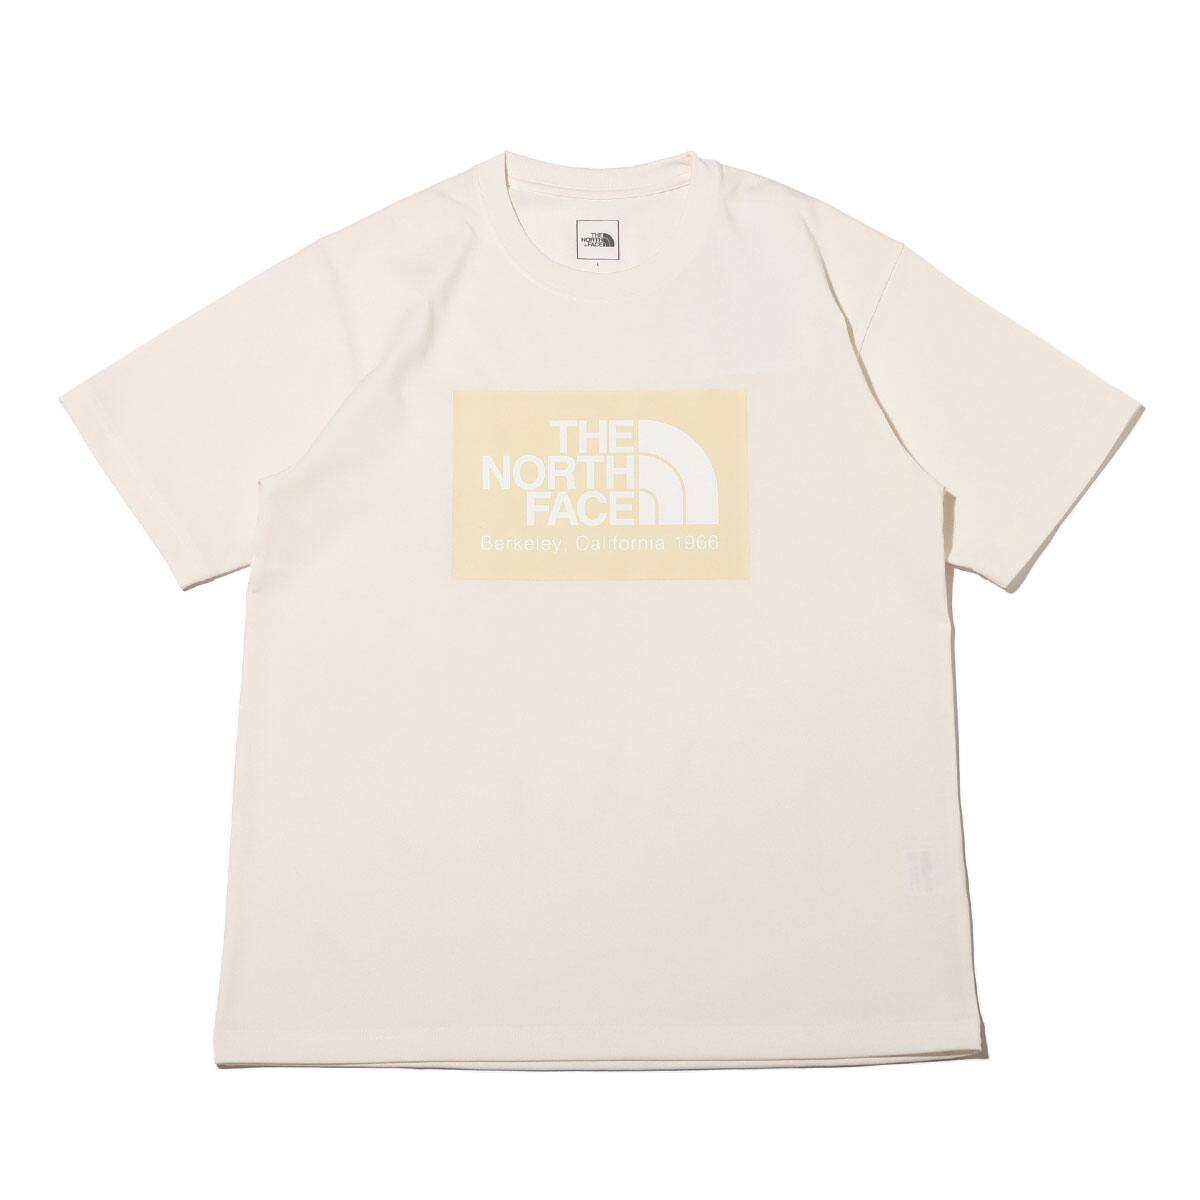 THE NORTH FACE S/S CALIFORNIA LOGO TEE オフホワイト 23SS-I_photo_large